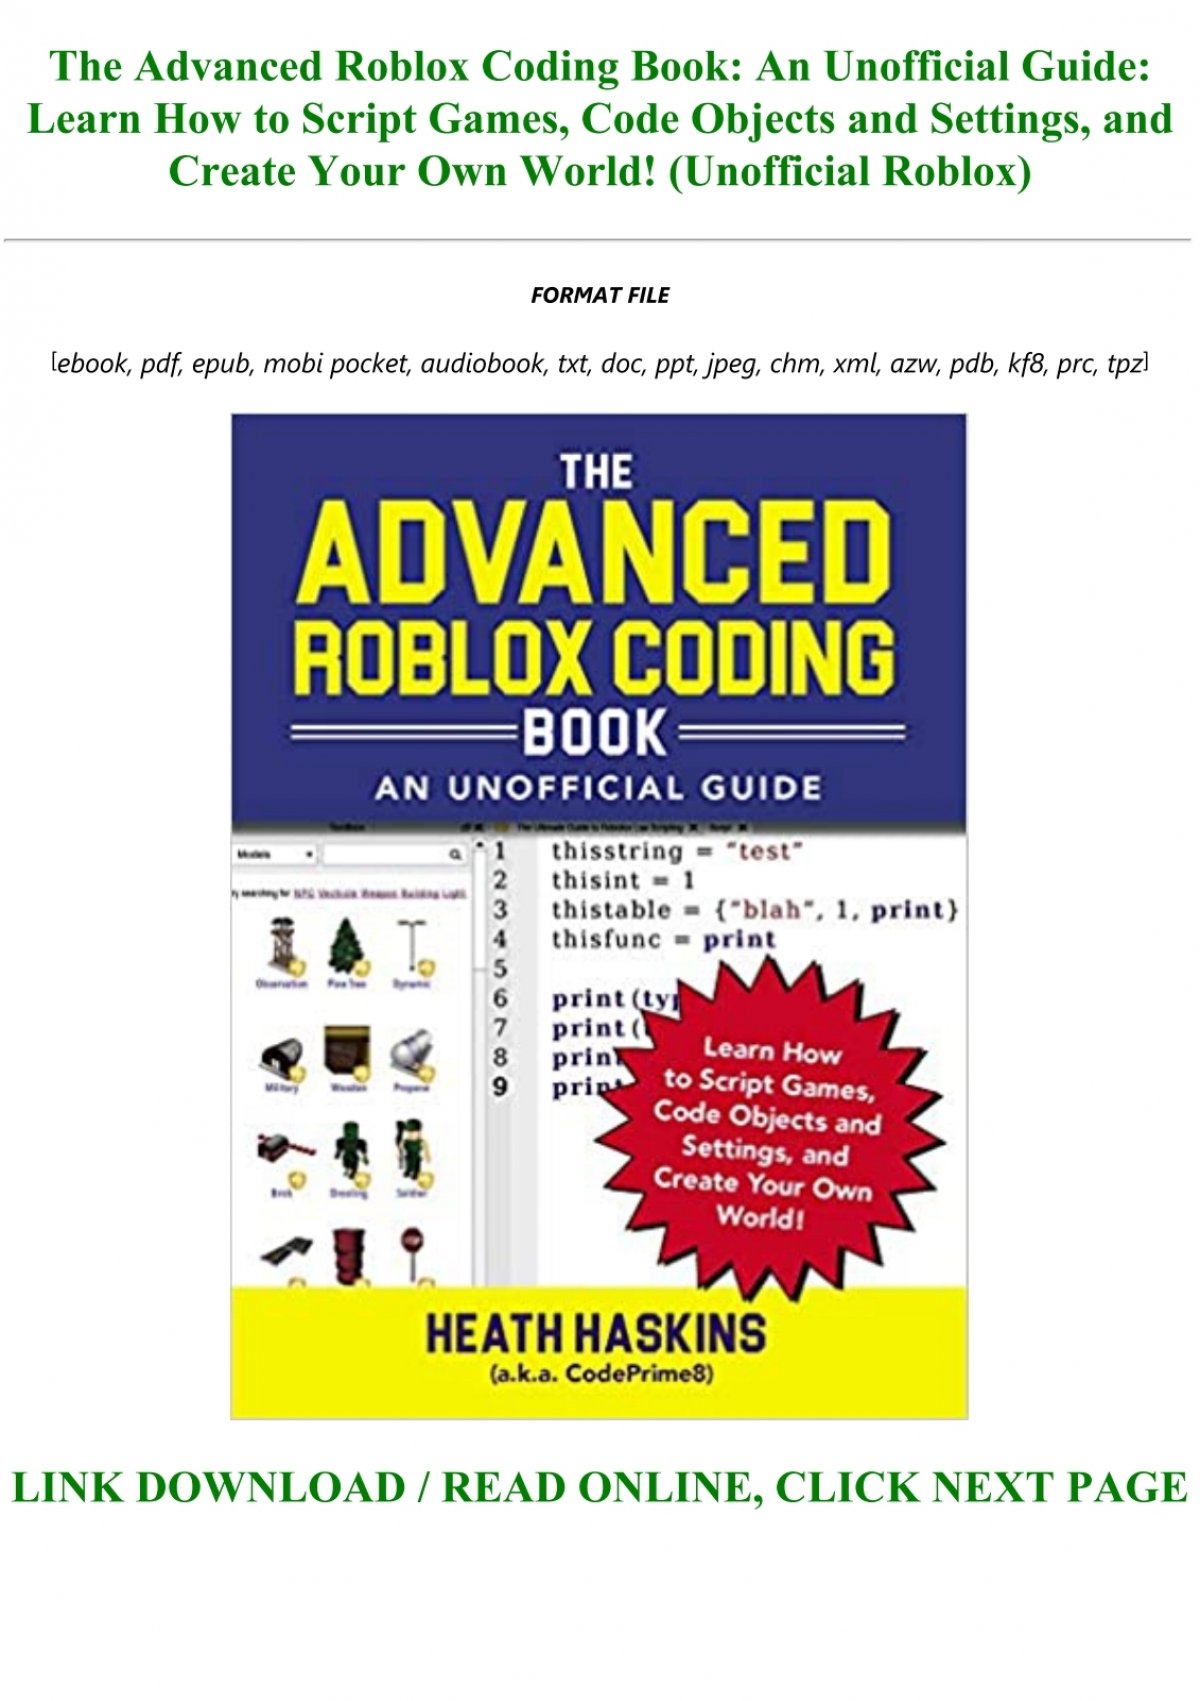 Download E B O O K The Advanced Roblox Coding Book An Unofficial Guide Learn How To Script Games Code Objects And Settings And Create Your Own World Unofficial Roblox Full - roblox script games